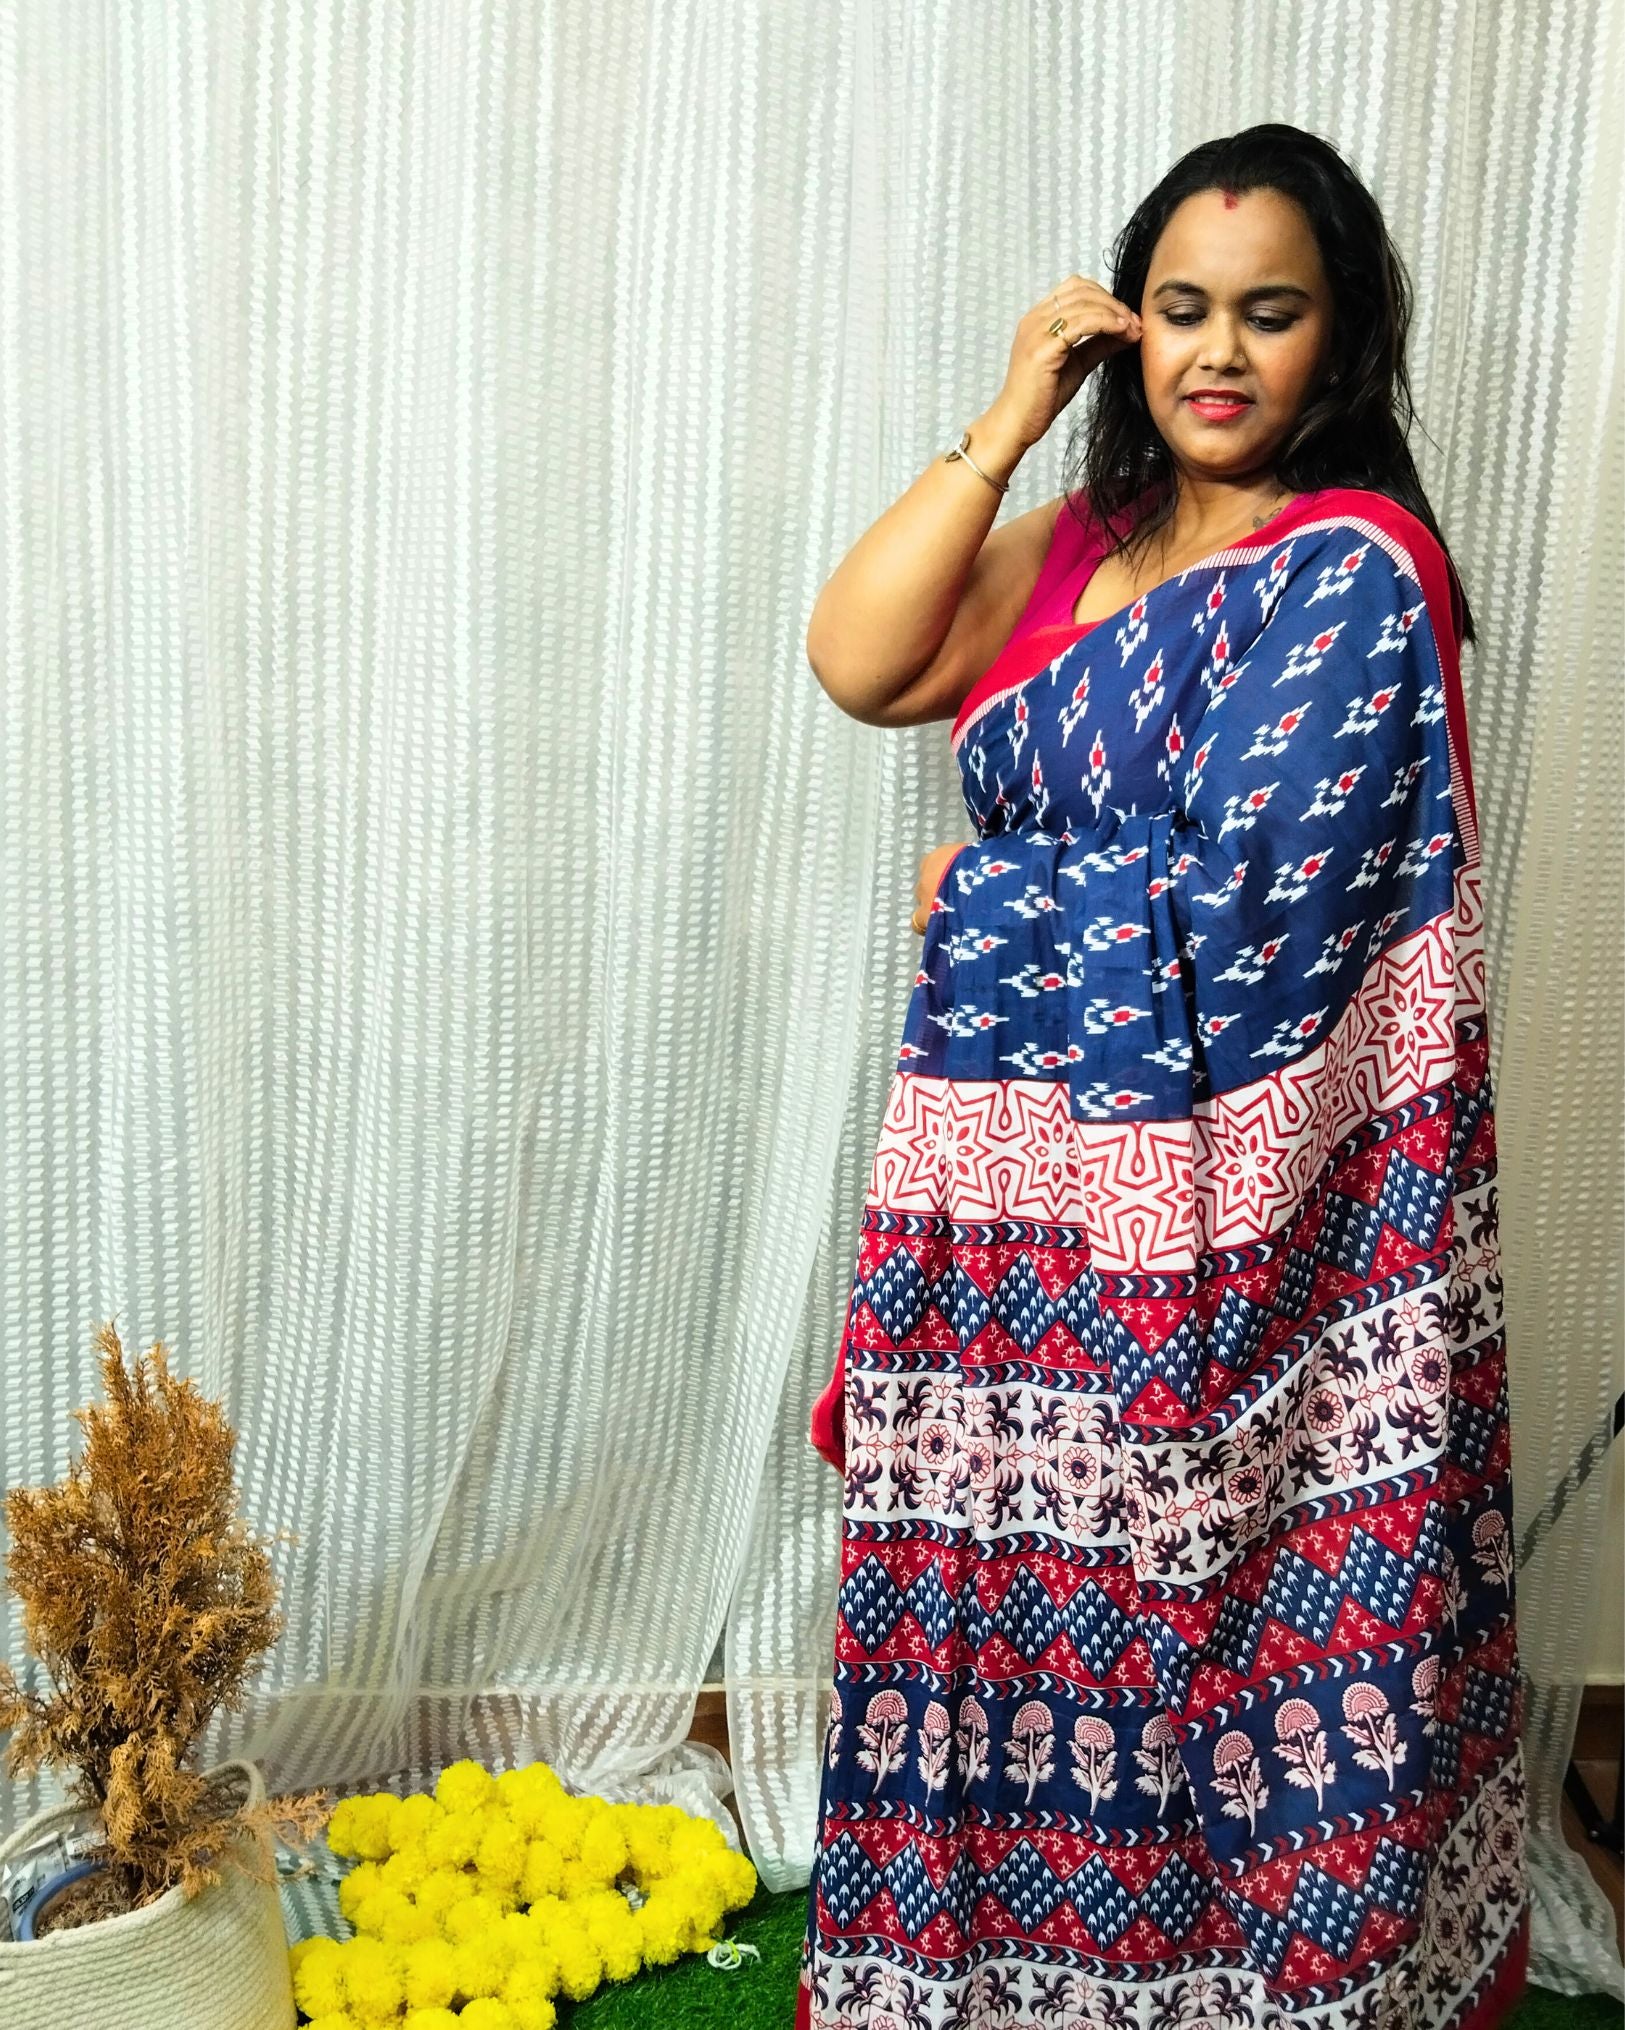 Mulmul Cotton Saree Royal Blue Color Handblock Printed with contrast blouse - IndieHaat